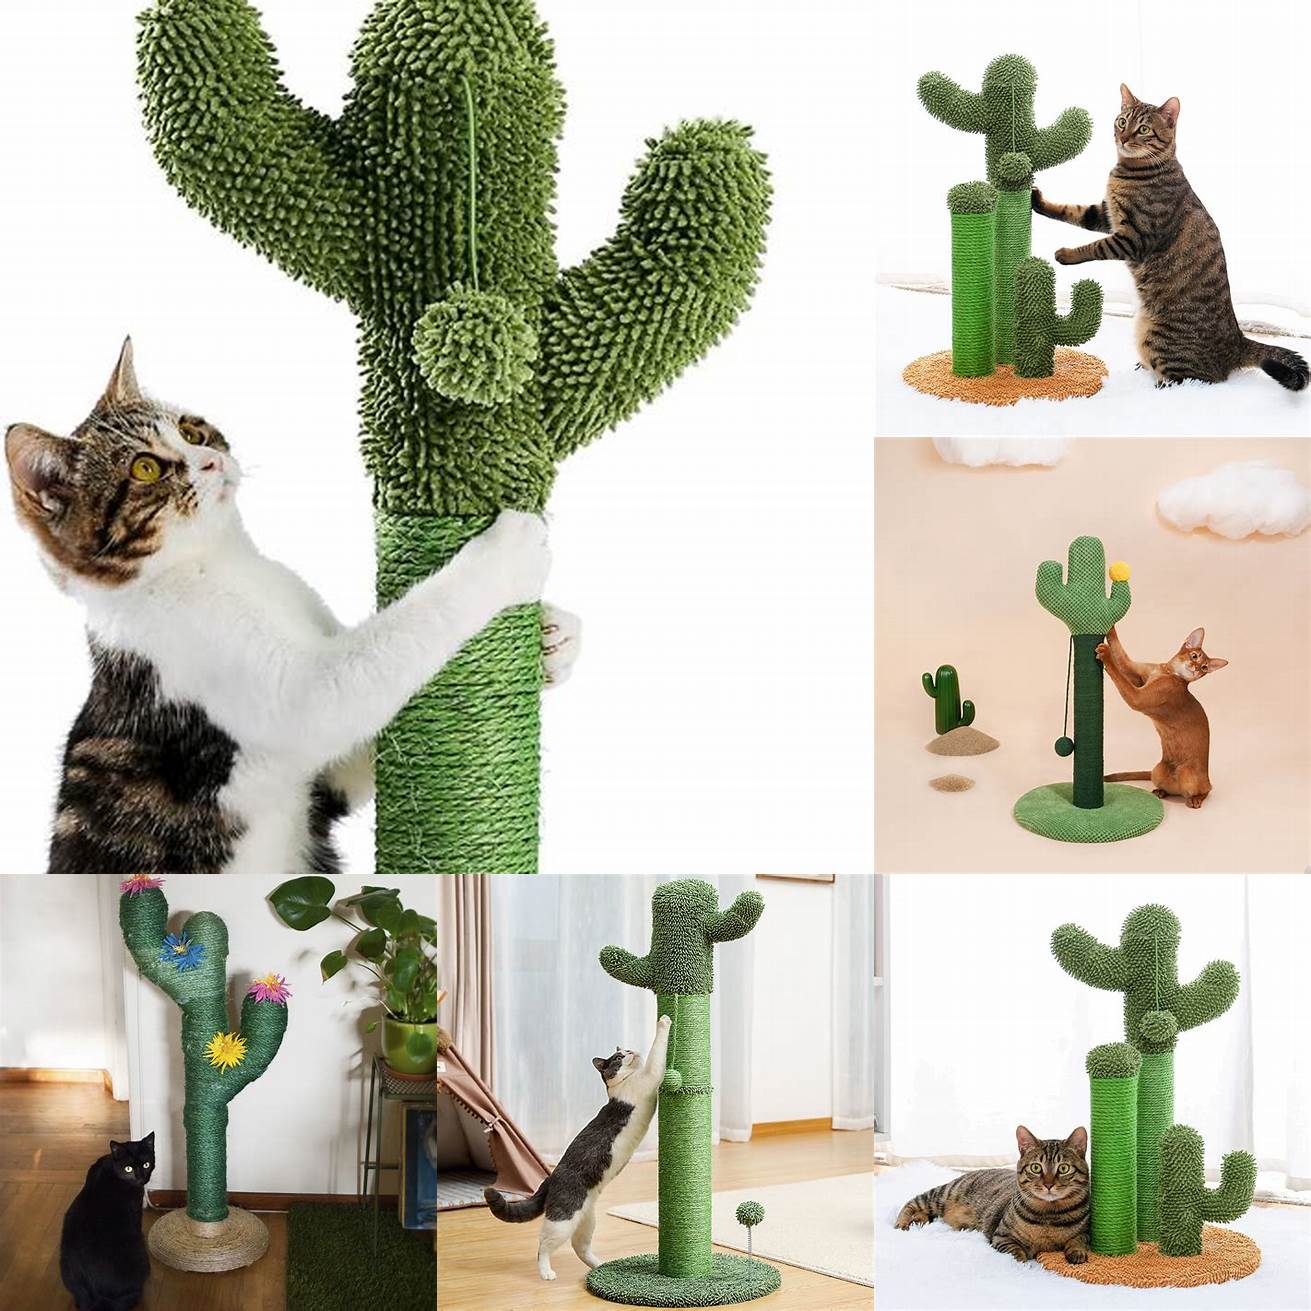 Use the Cactus Cat Scratching Post as a photo prop for some adorable Instagram-worthy shots of your cat